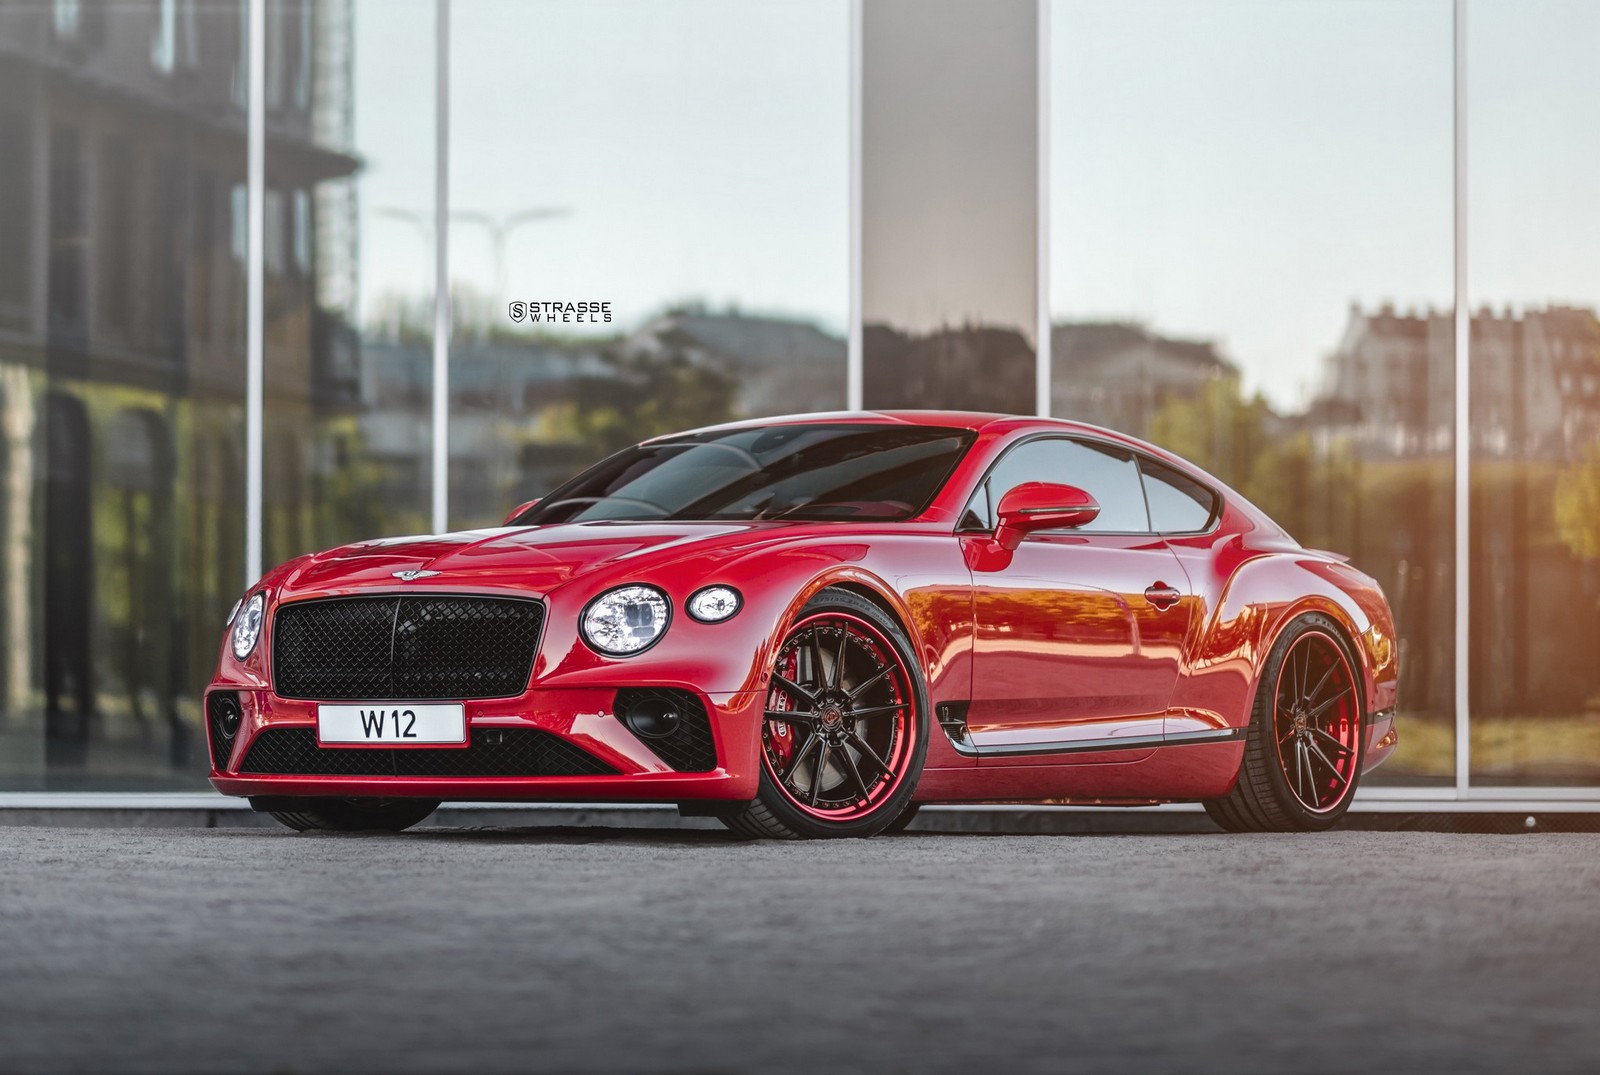 How Much Red Is Too Much? Meet Strasse's Custom Bentley Continental GT ...